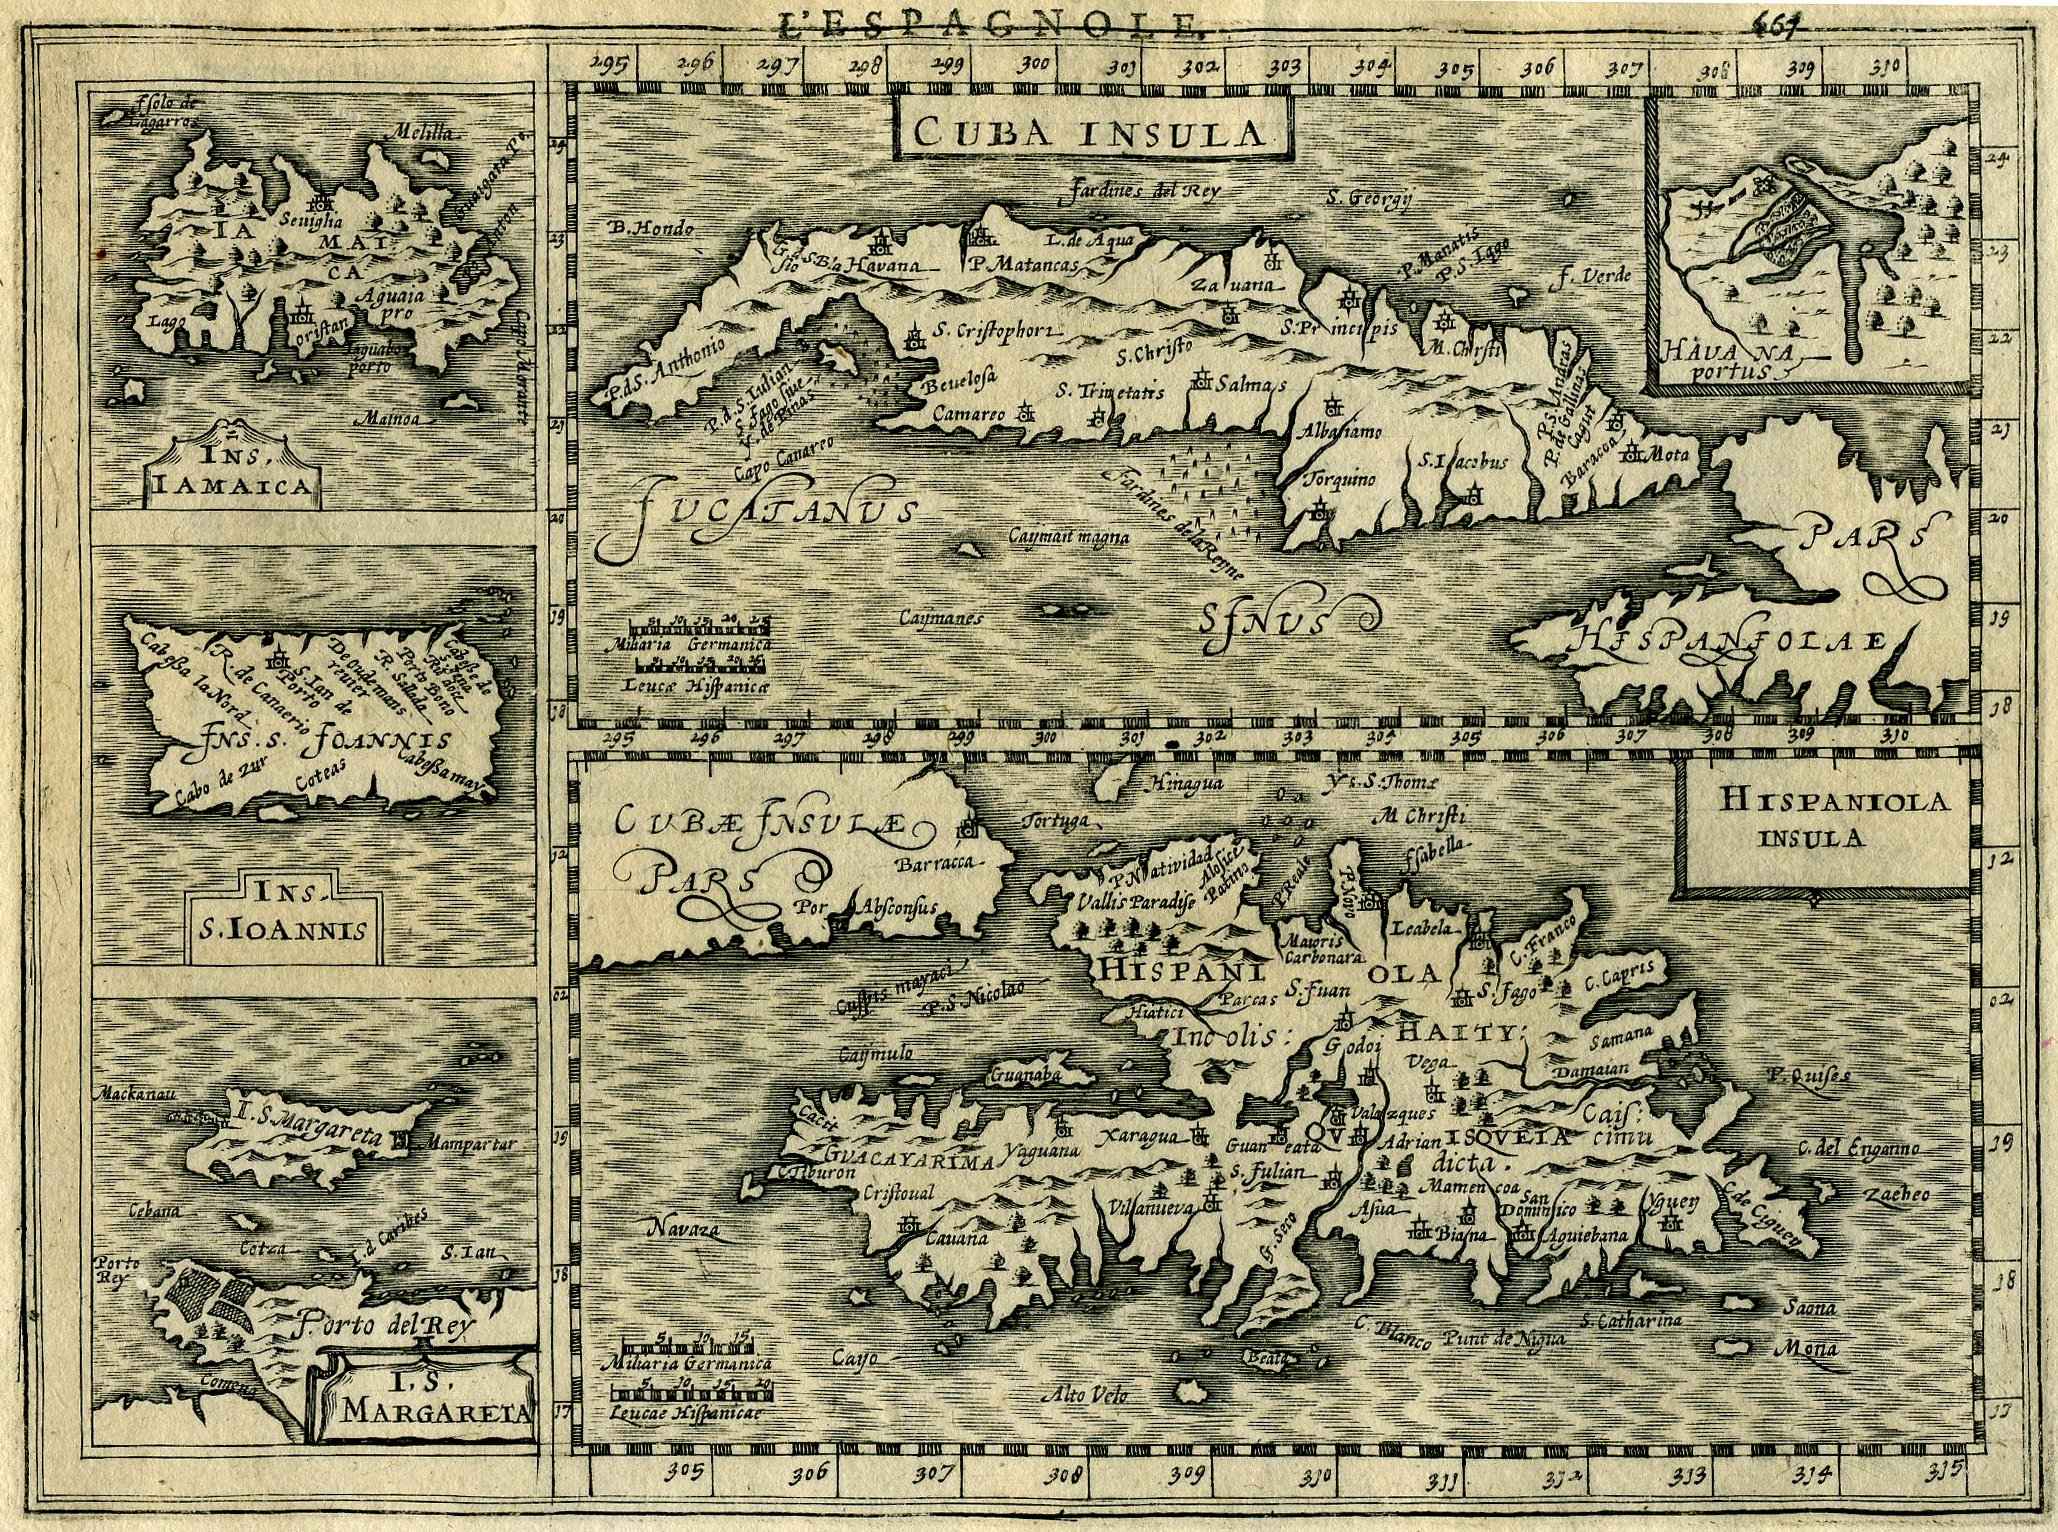 Mercator's Map of the Caribbean from Atlas Minor, 1631